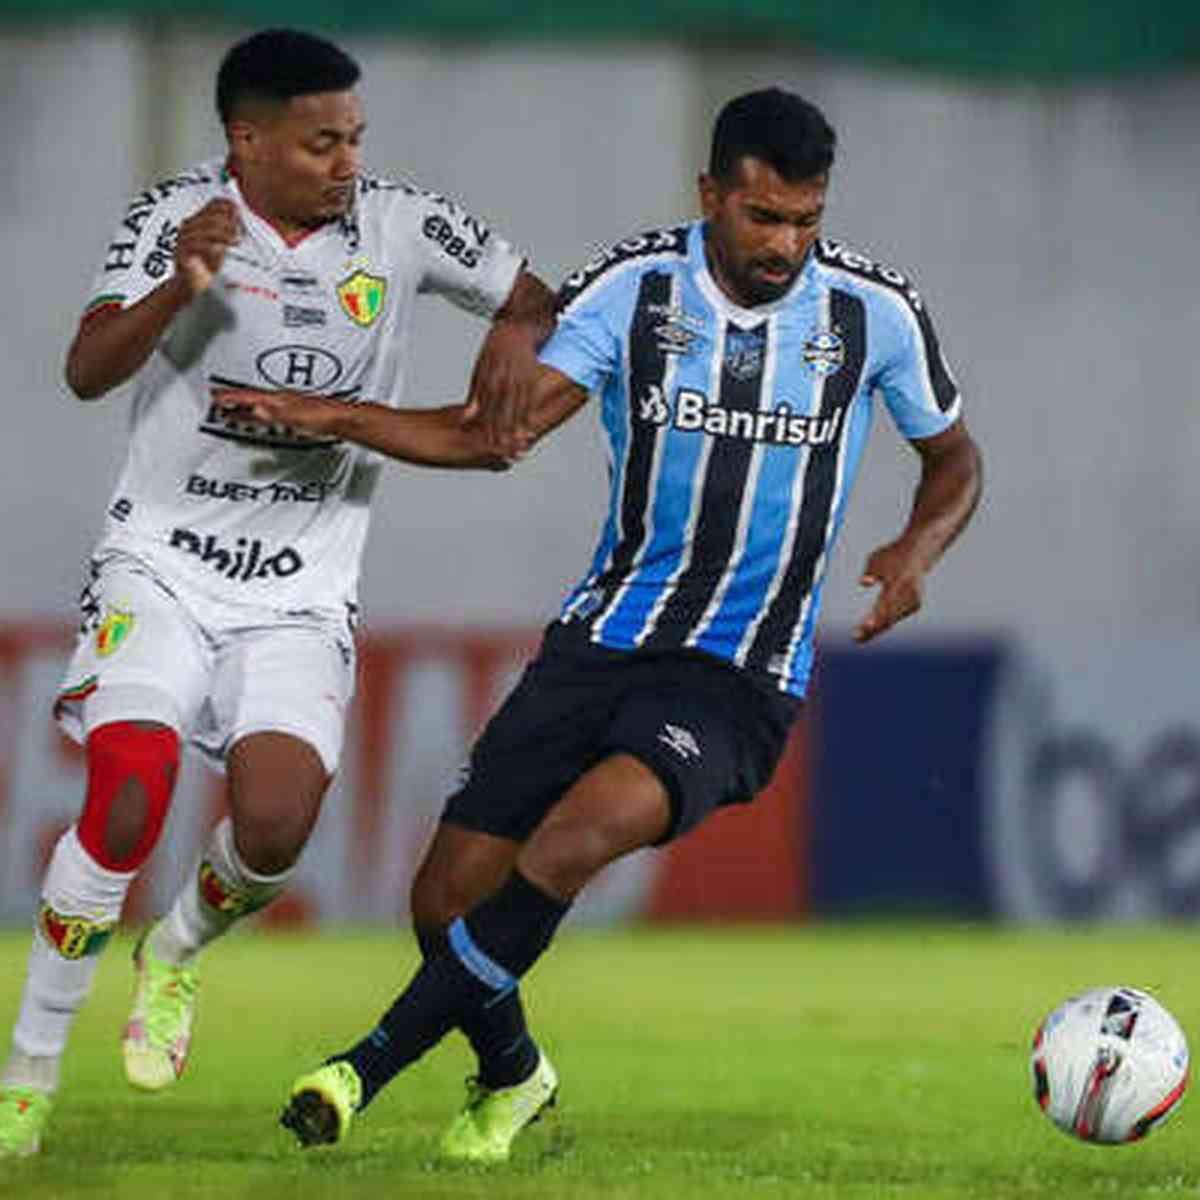 Ceará SC vs Tombense: An Exciting Clash of Two Formidable Teams